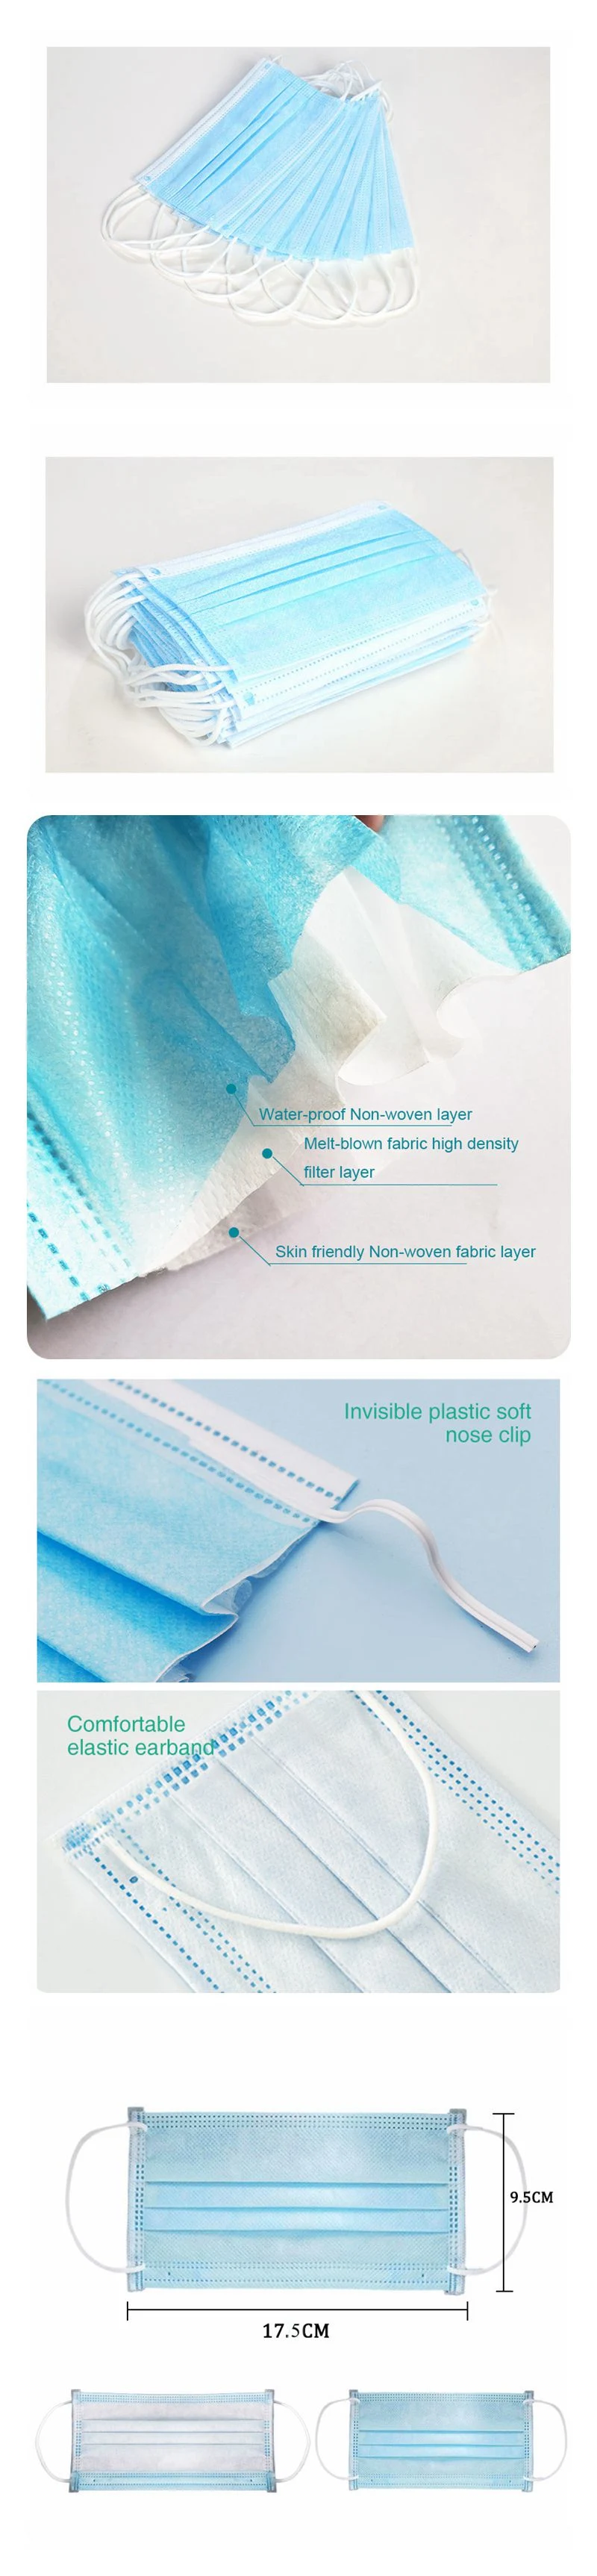 3 Ply Nonwoven Fabric and Filter Fabric Wholesale Protective Mask Disposable Civilian Mask